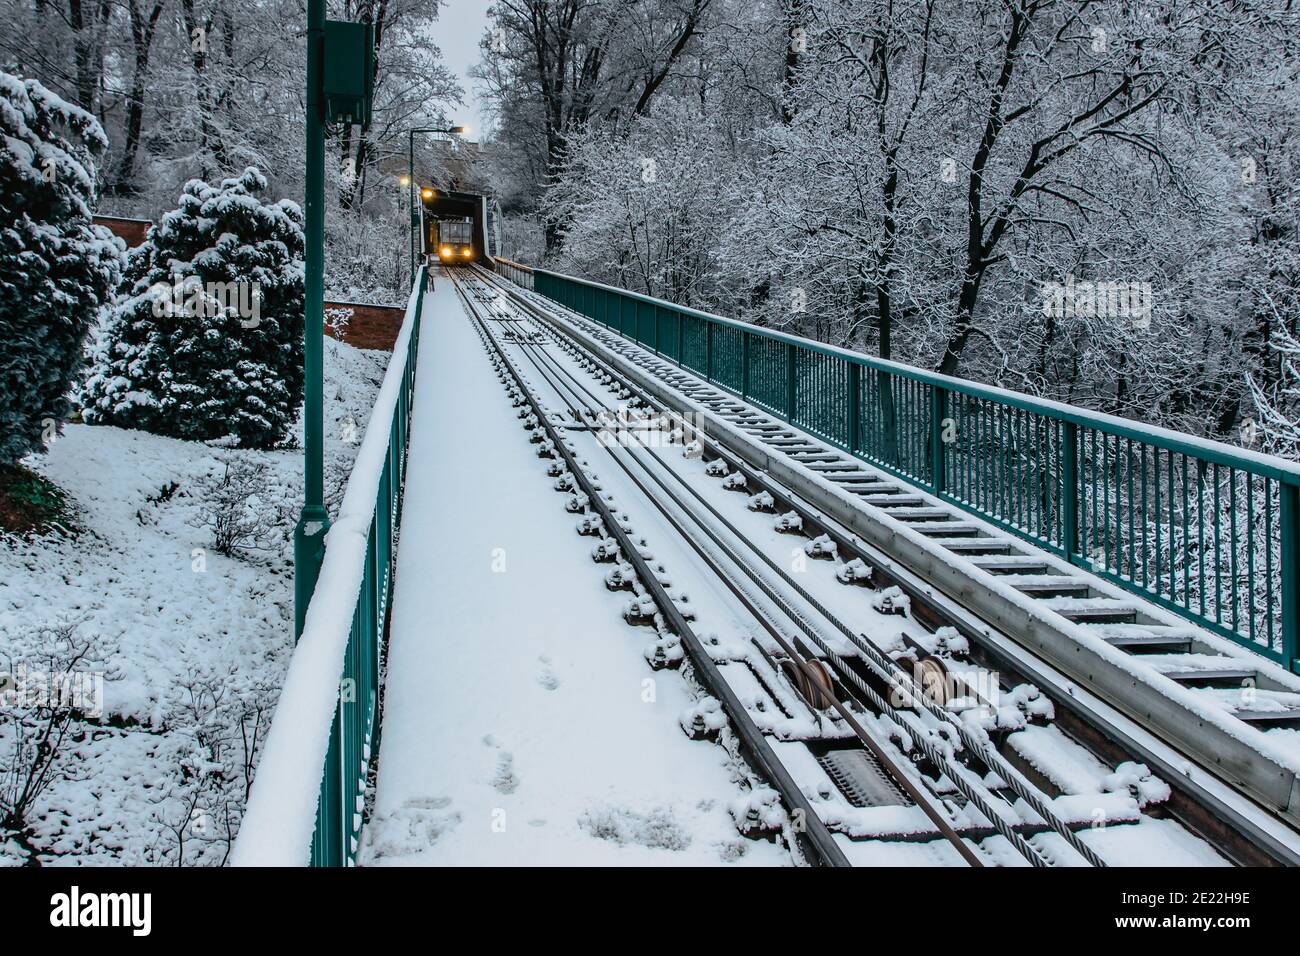 The two-carriage Petrin funicular railway runing from Lesser Town to Petrin Lookout Tower,Prague,Czech republic.Technical monument public transport Stock Photo